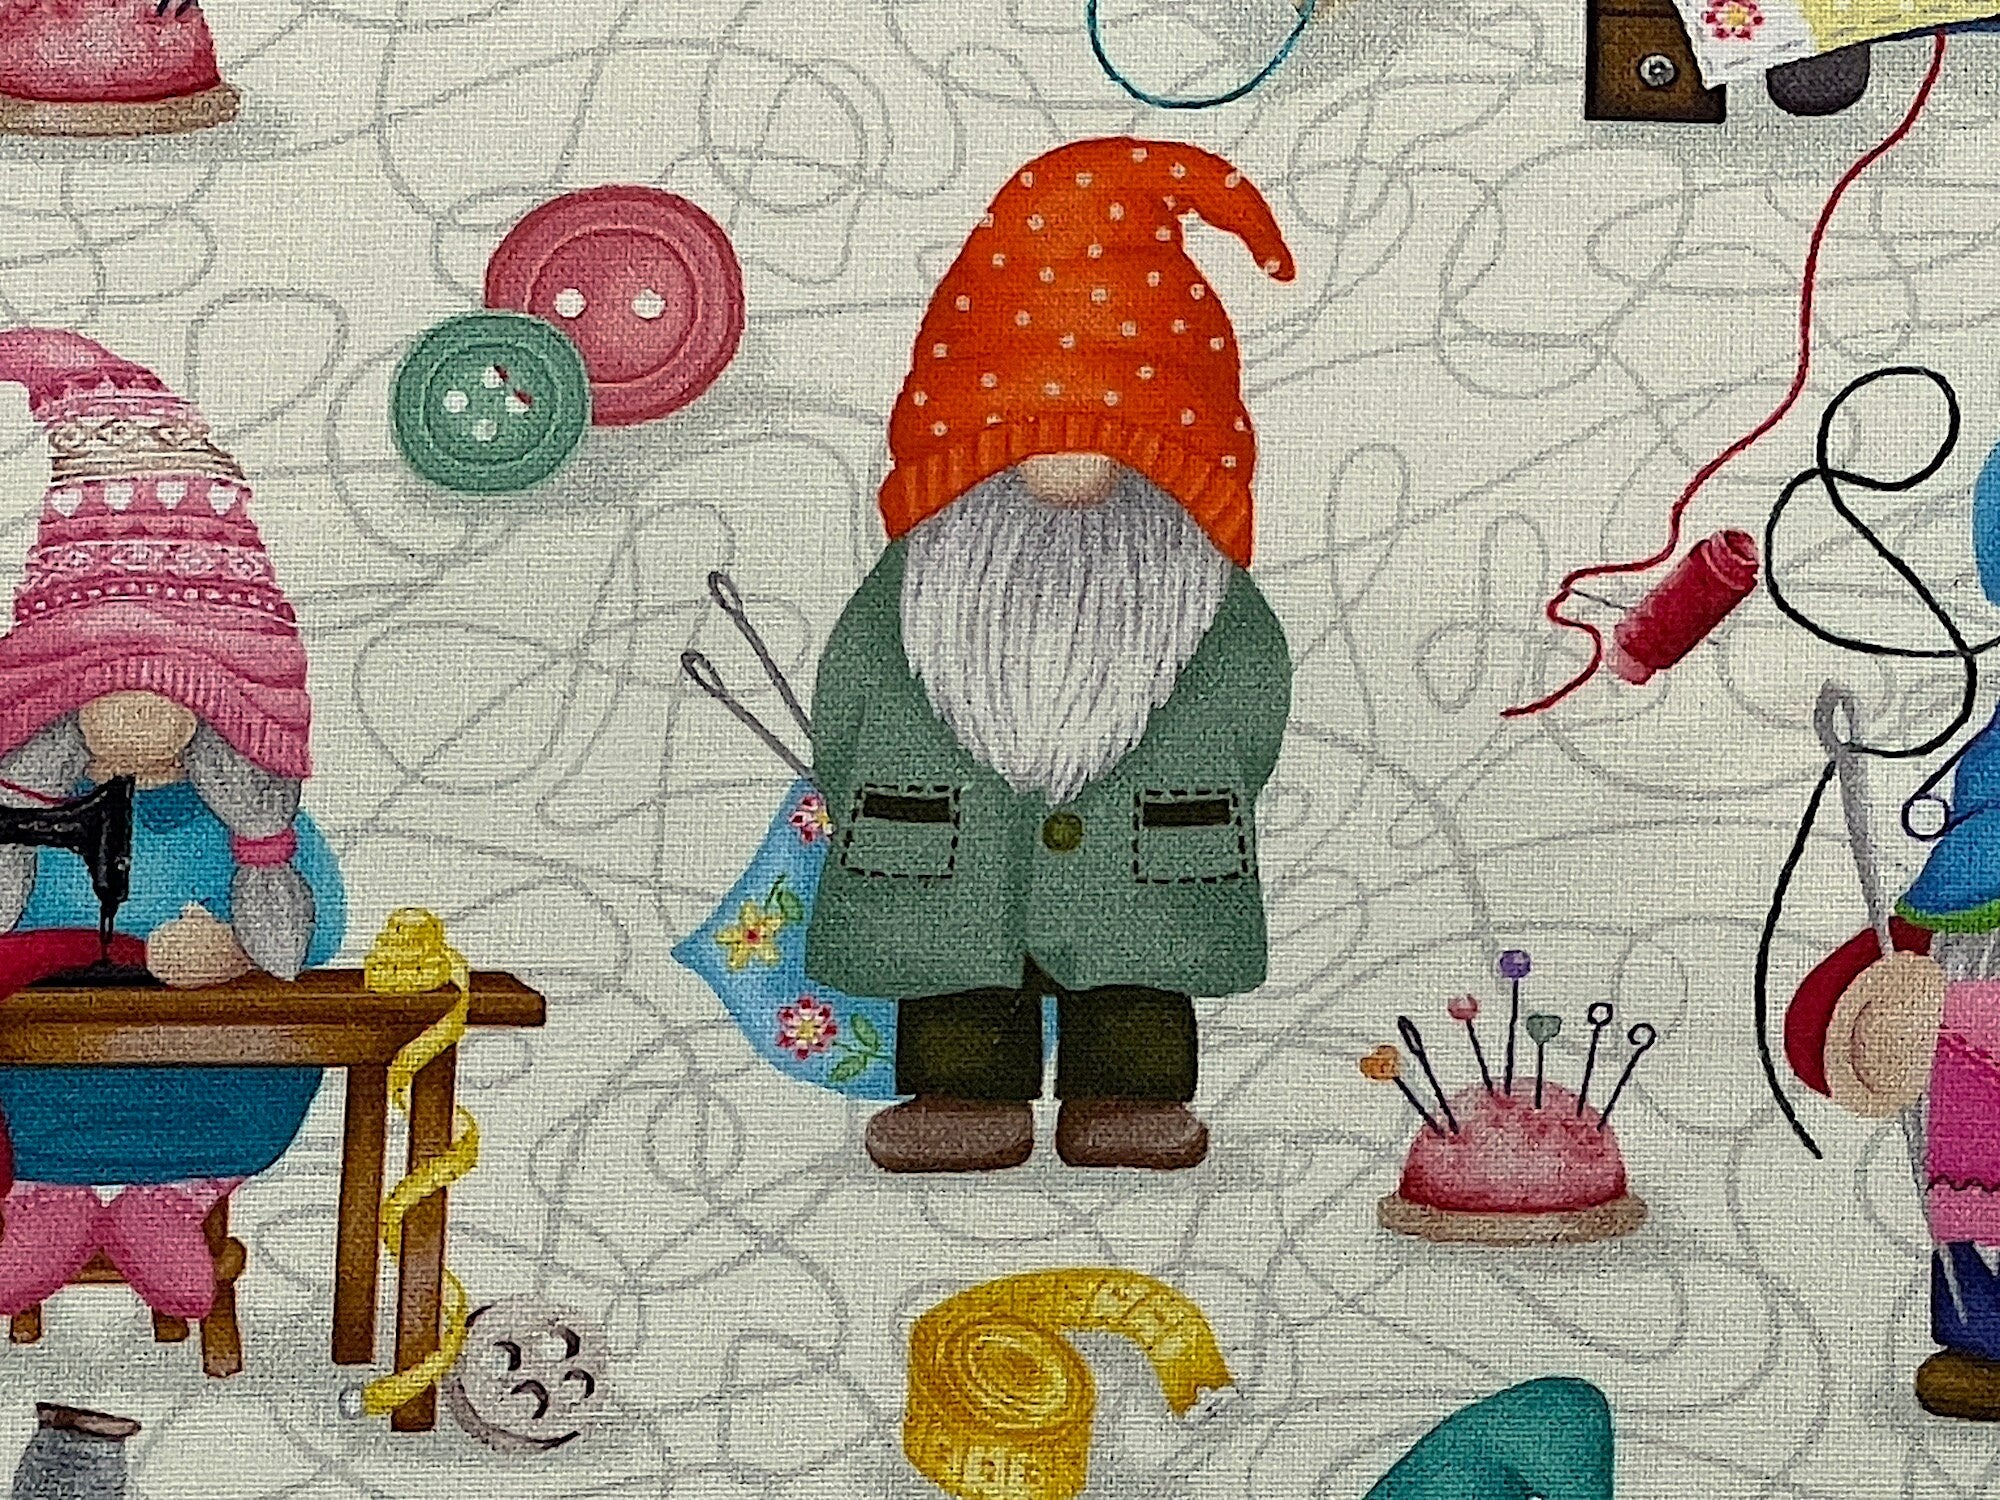 Close up of a gnome with a red hat.